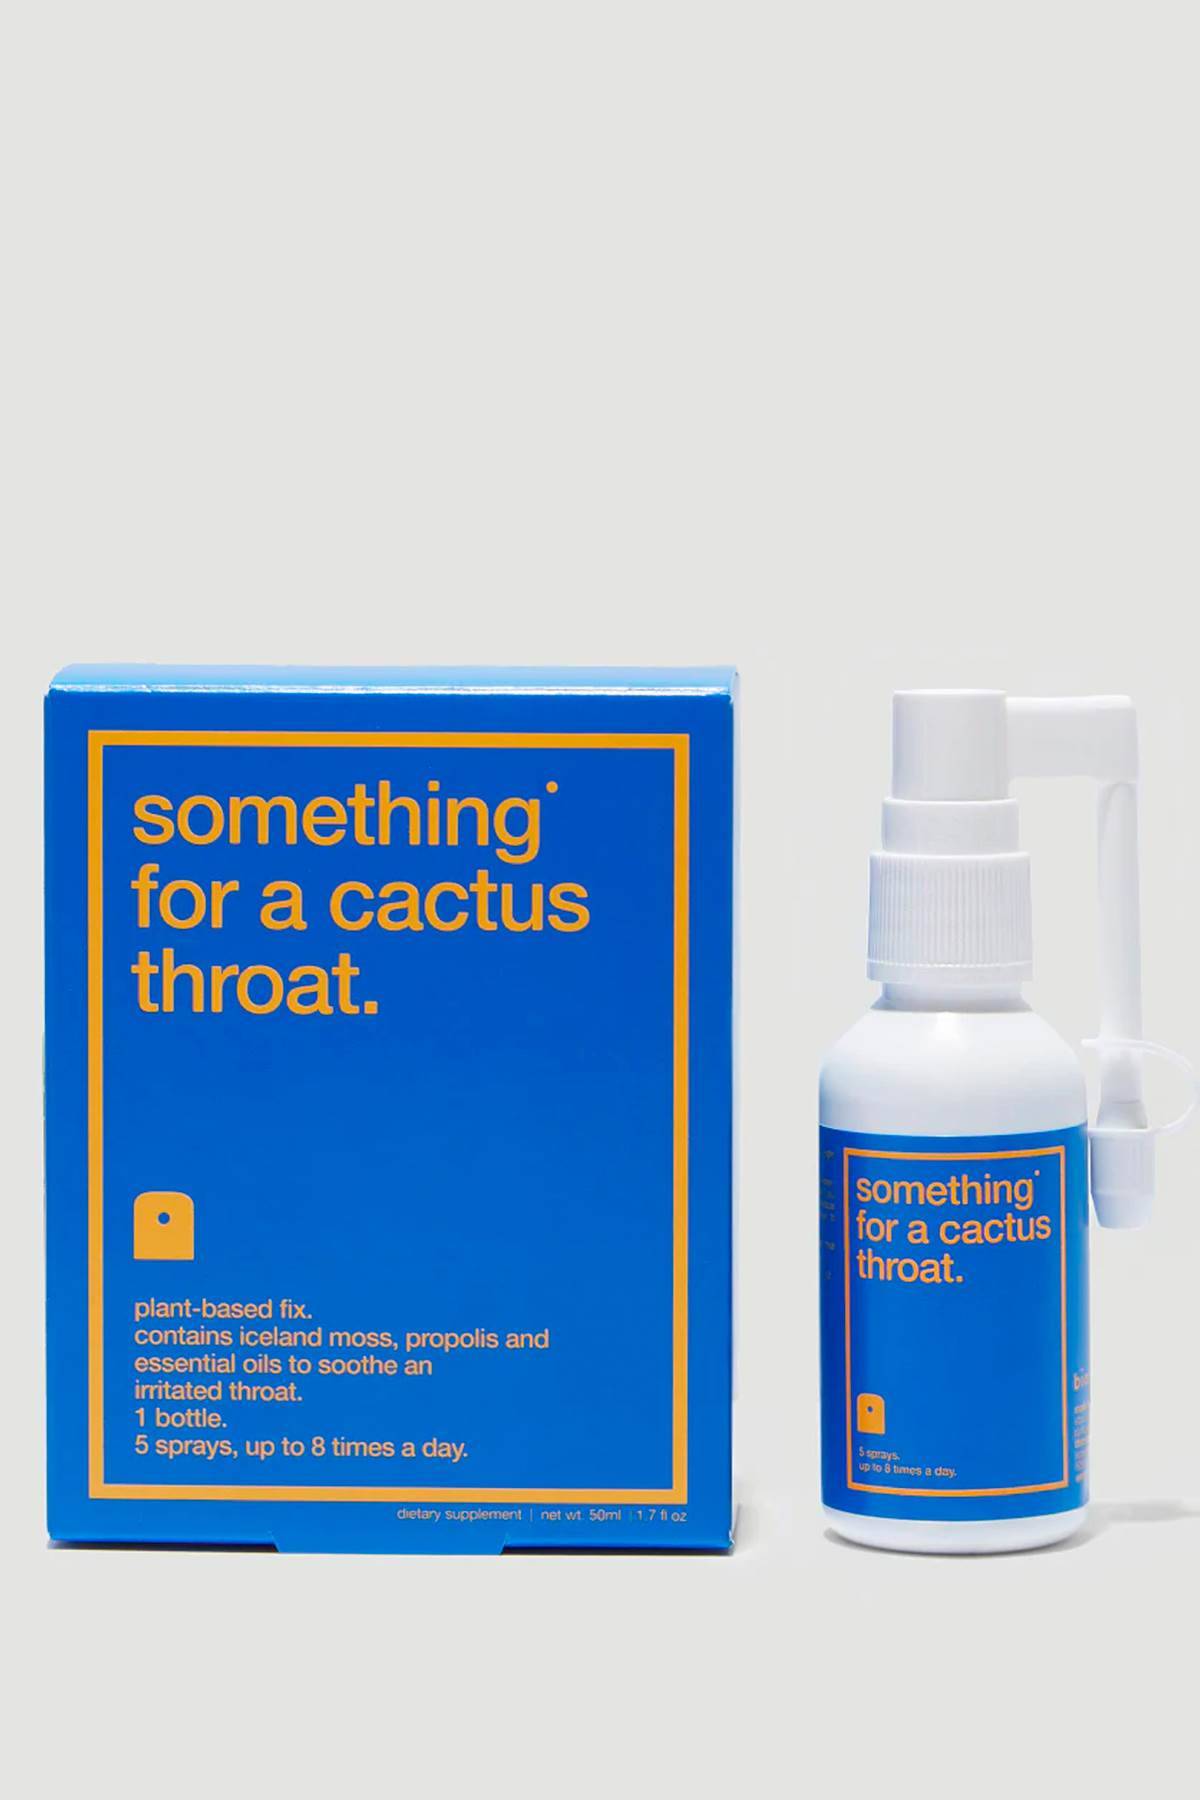 BIOCOL LABS BIOCOL LABS something for a cactus throat